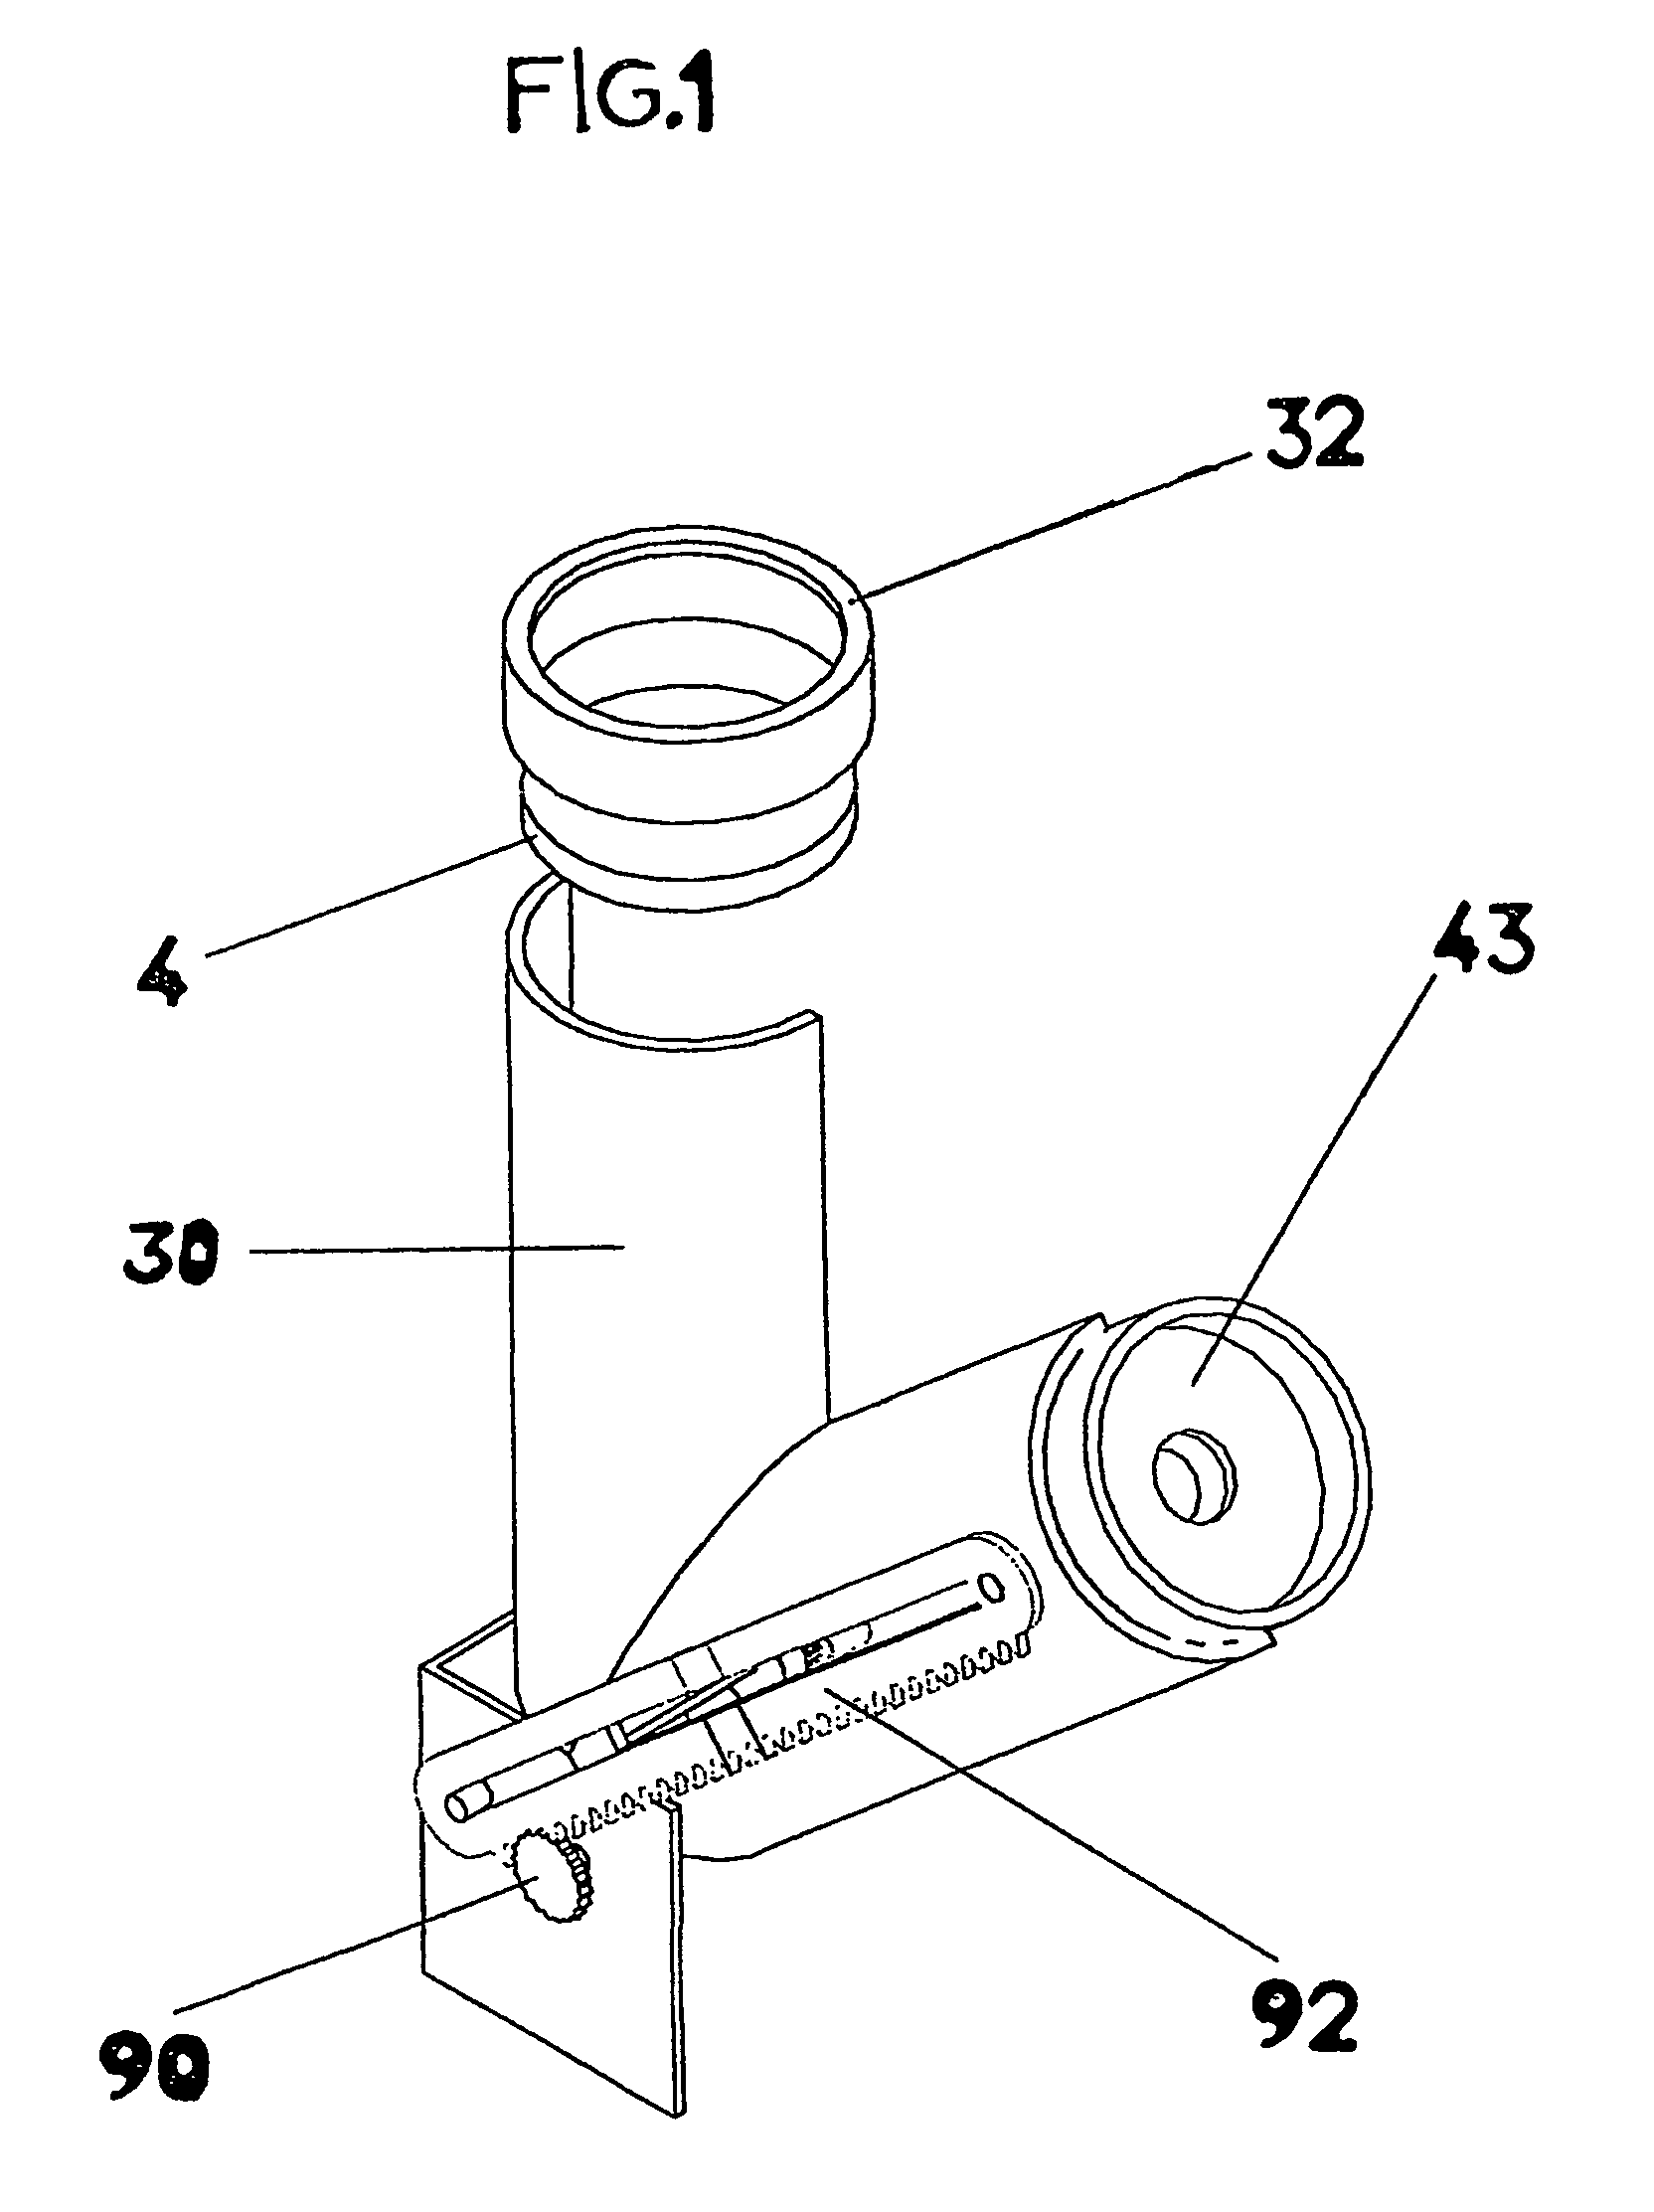 Device for destroying sharp, pointed objects which is fitted with means for automatically unscrewing injecting needles and similar